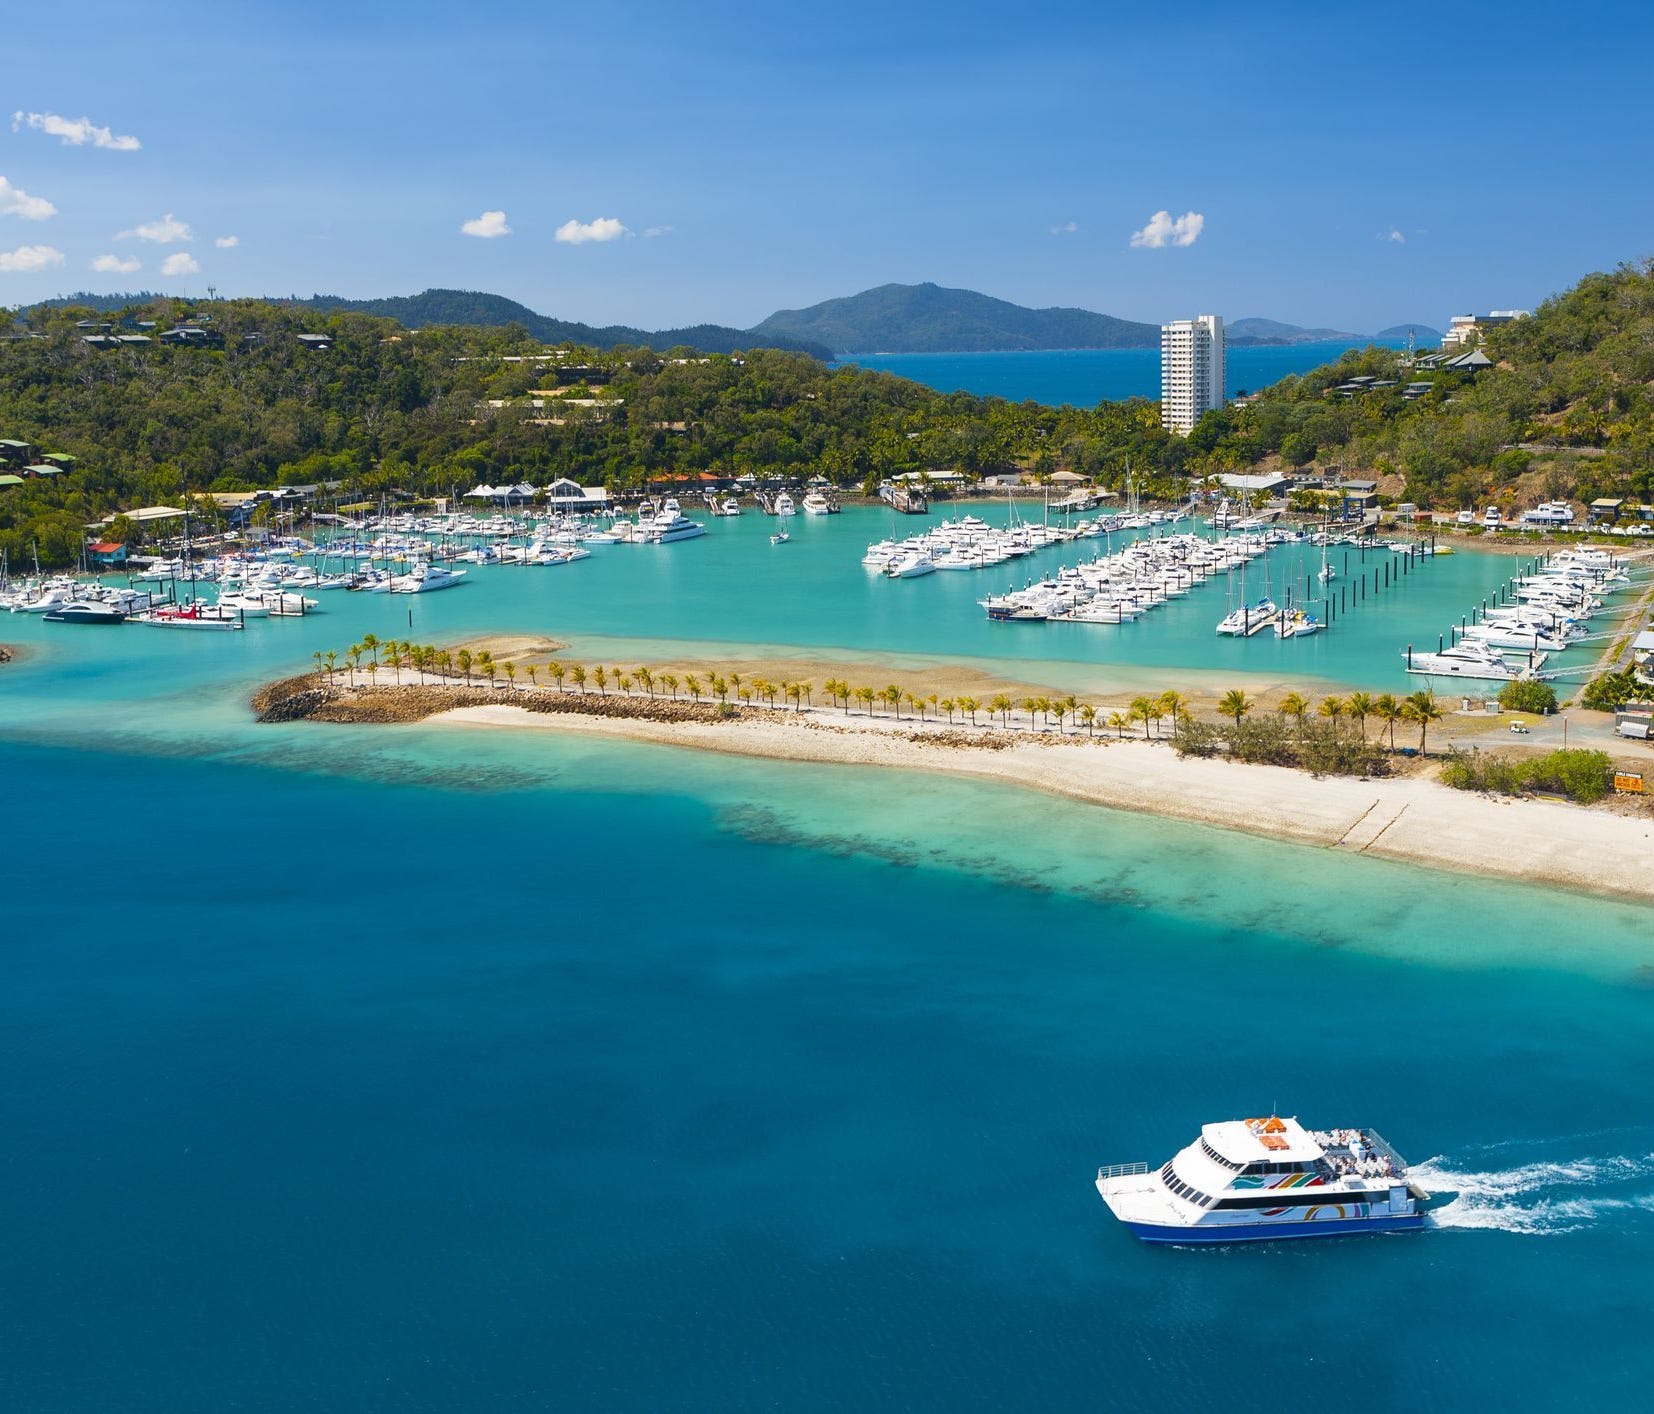 Hamilton Island, Australia: Popular among Australians, Hamilton Island is the largest inhabited island in the Whitsundays island chain. It's very popular for honeymoons, family vacations and holiday escapes. On Hamilton Island, you can explore the su